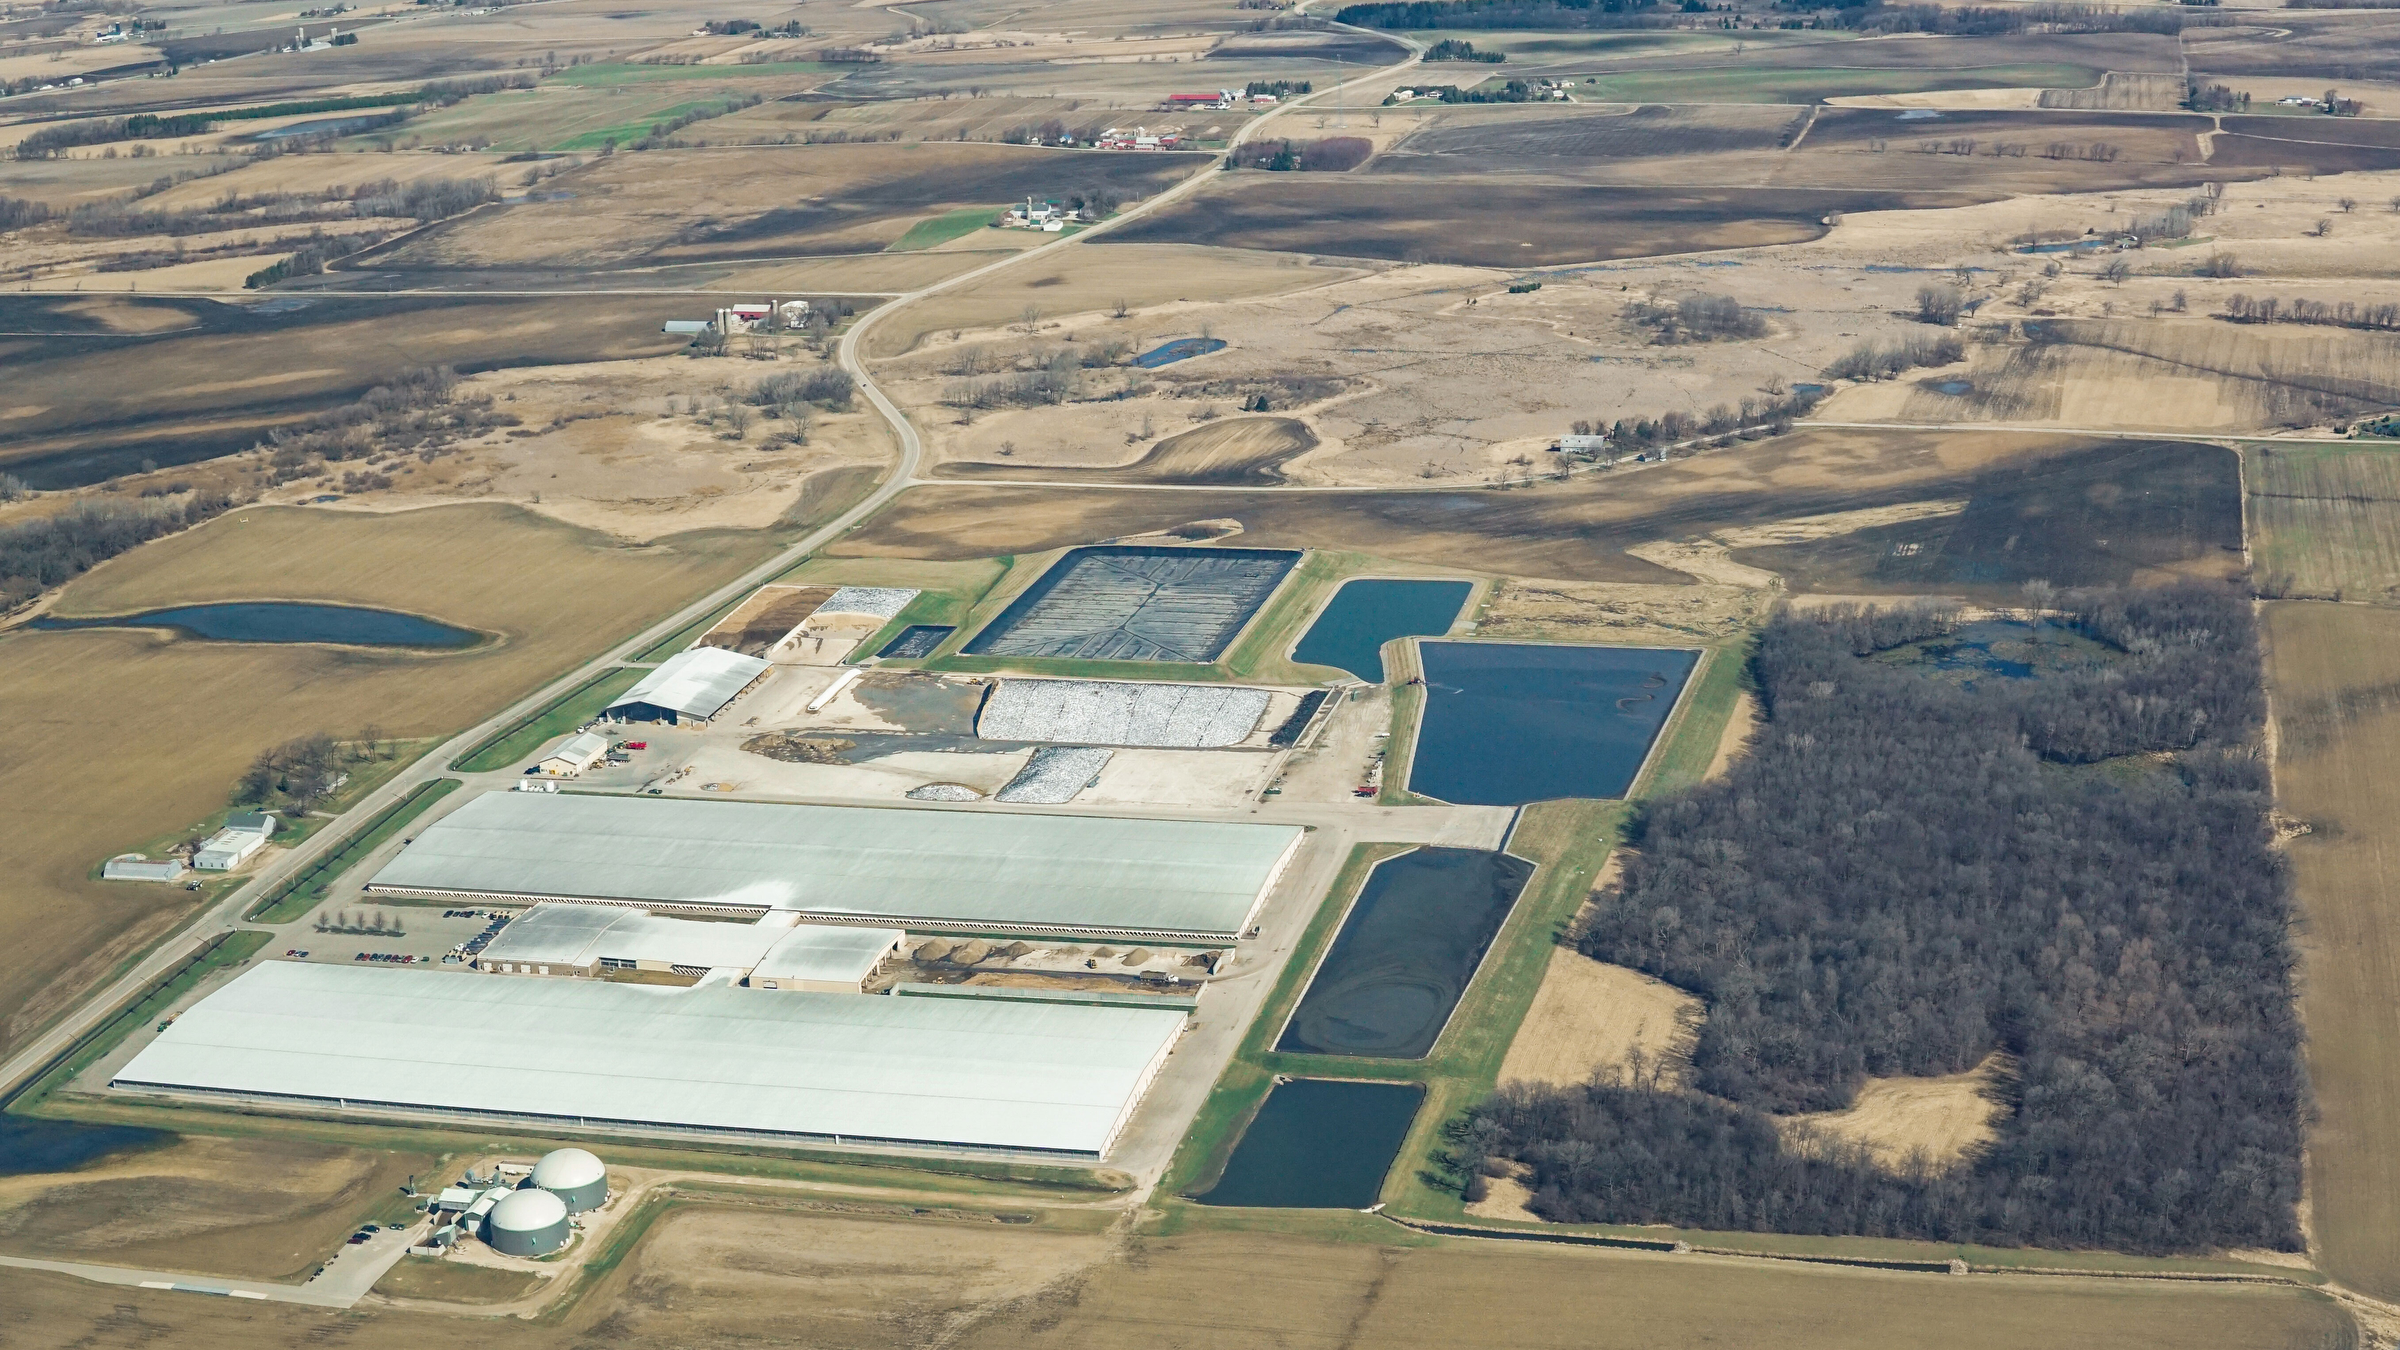 An aerial view of the Rosendale Dairy concentrated animal feeding operation in Fond du Lac County